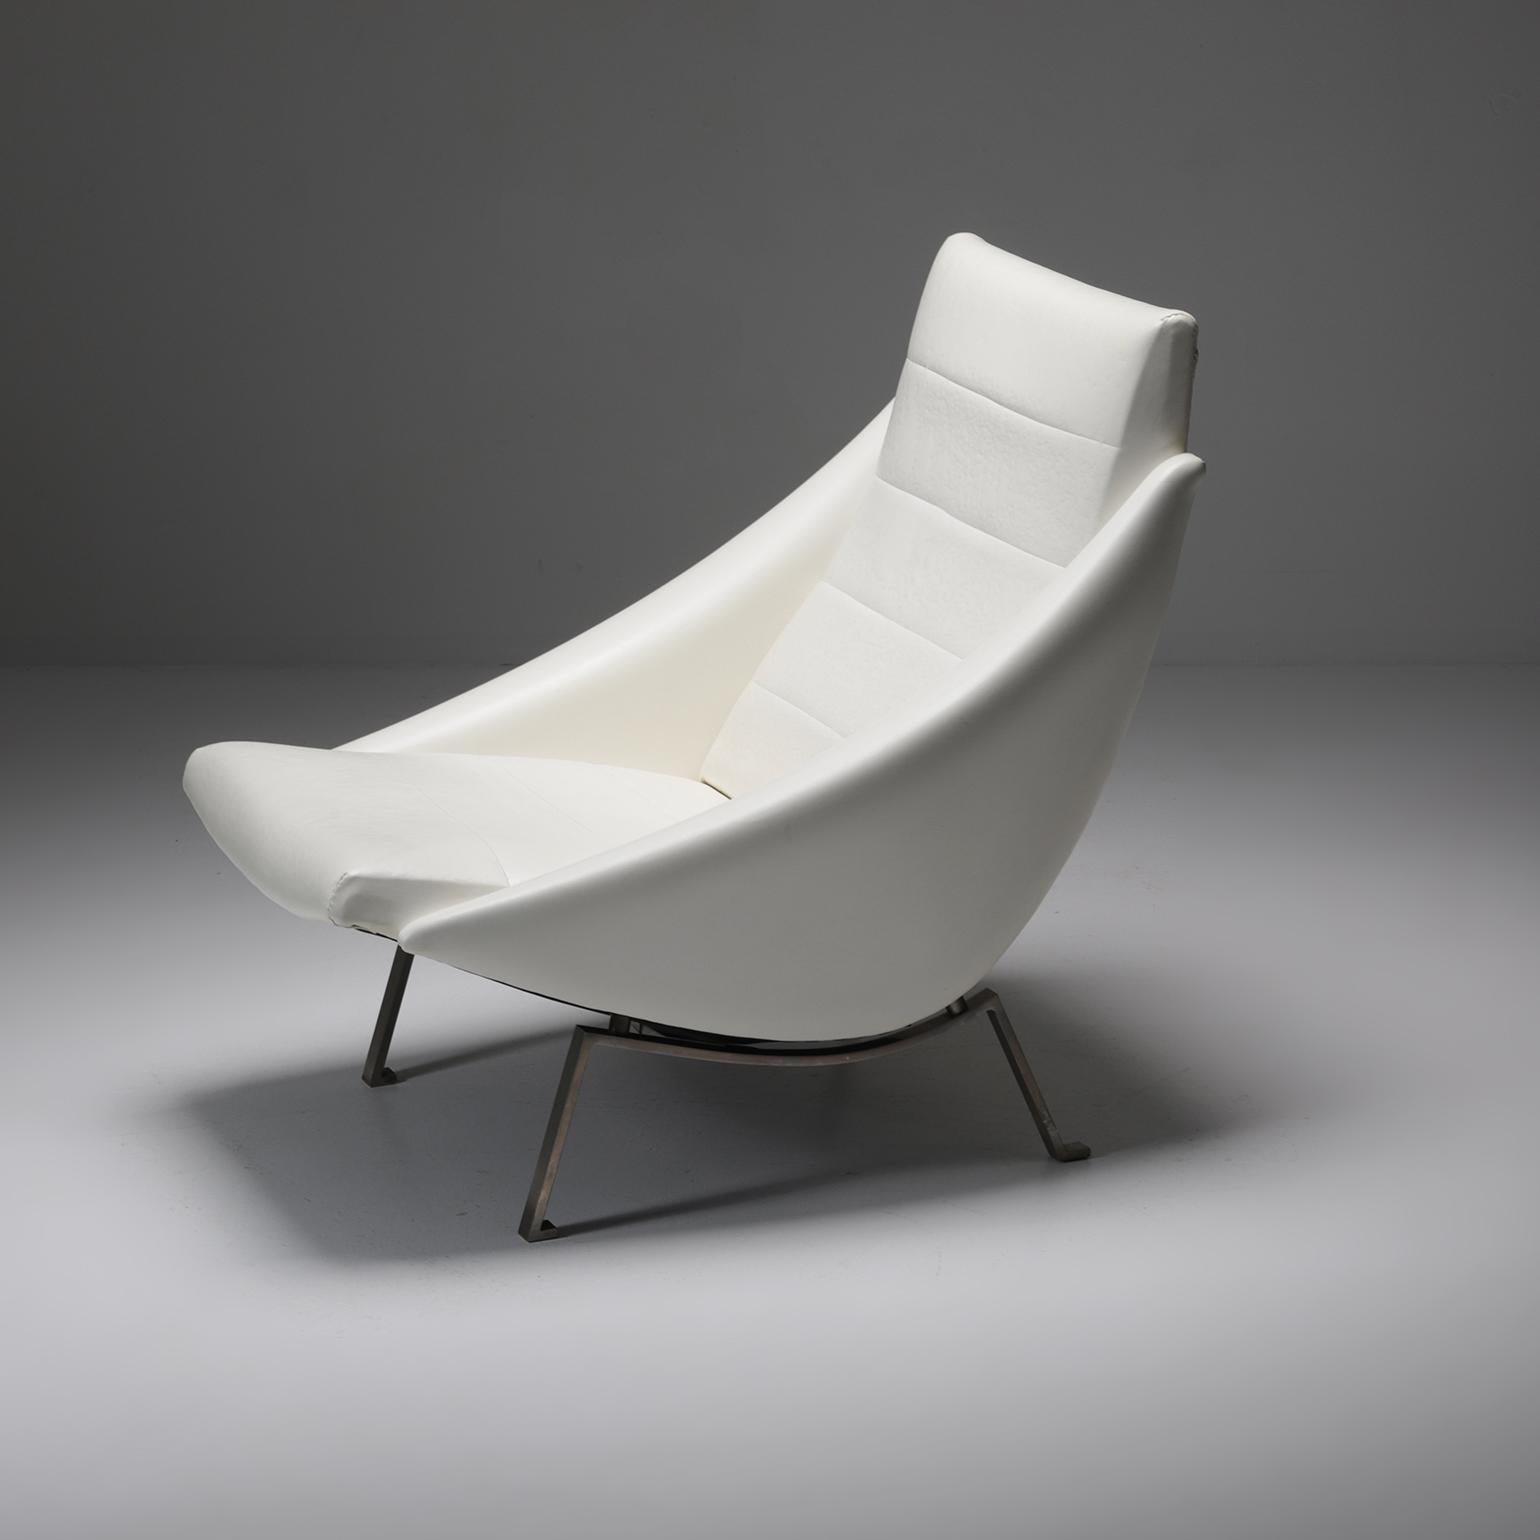 Rare Mid-Century Modernist Lounge Chair in White Original Viny 1950 For Sale 2